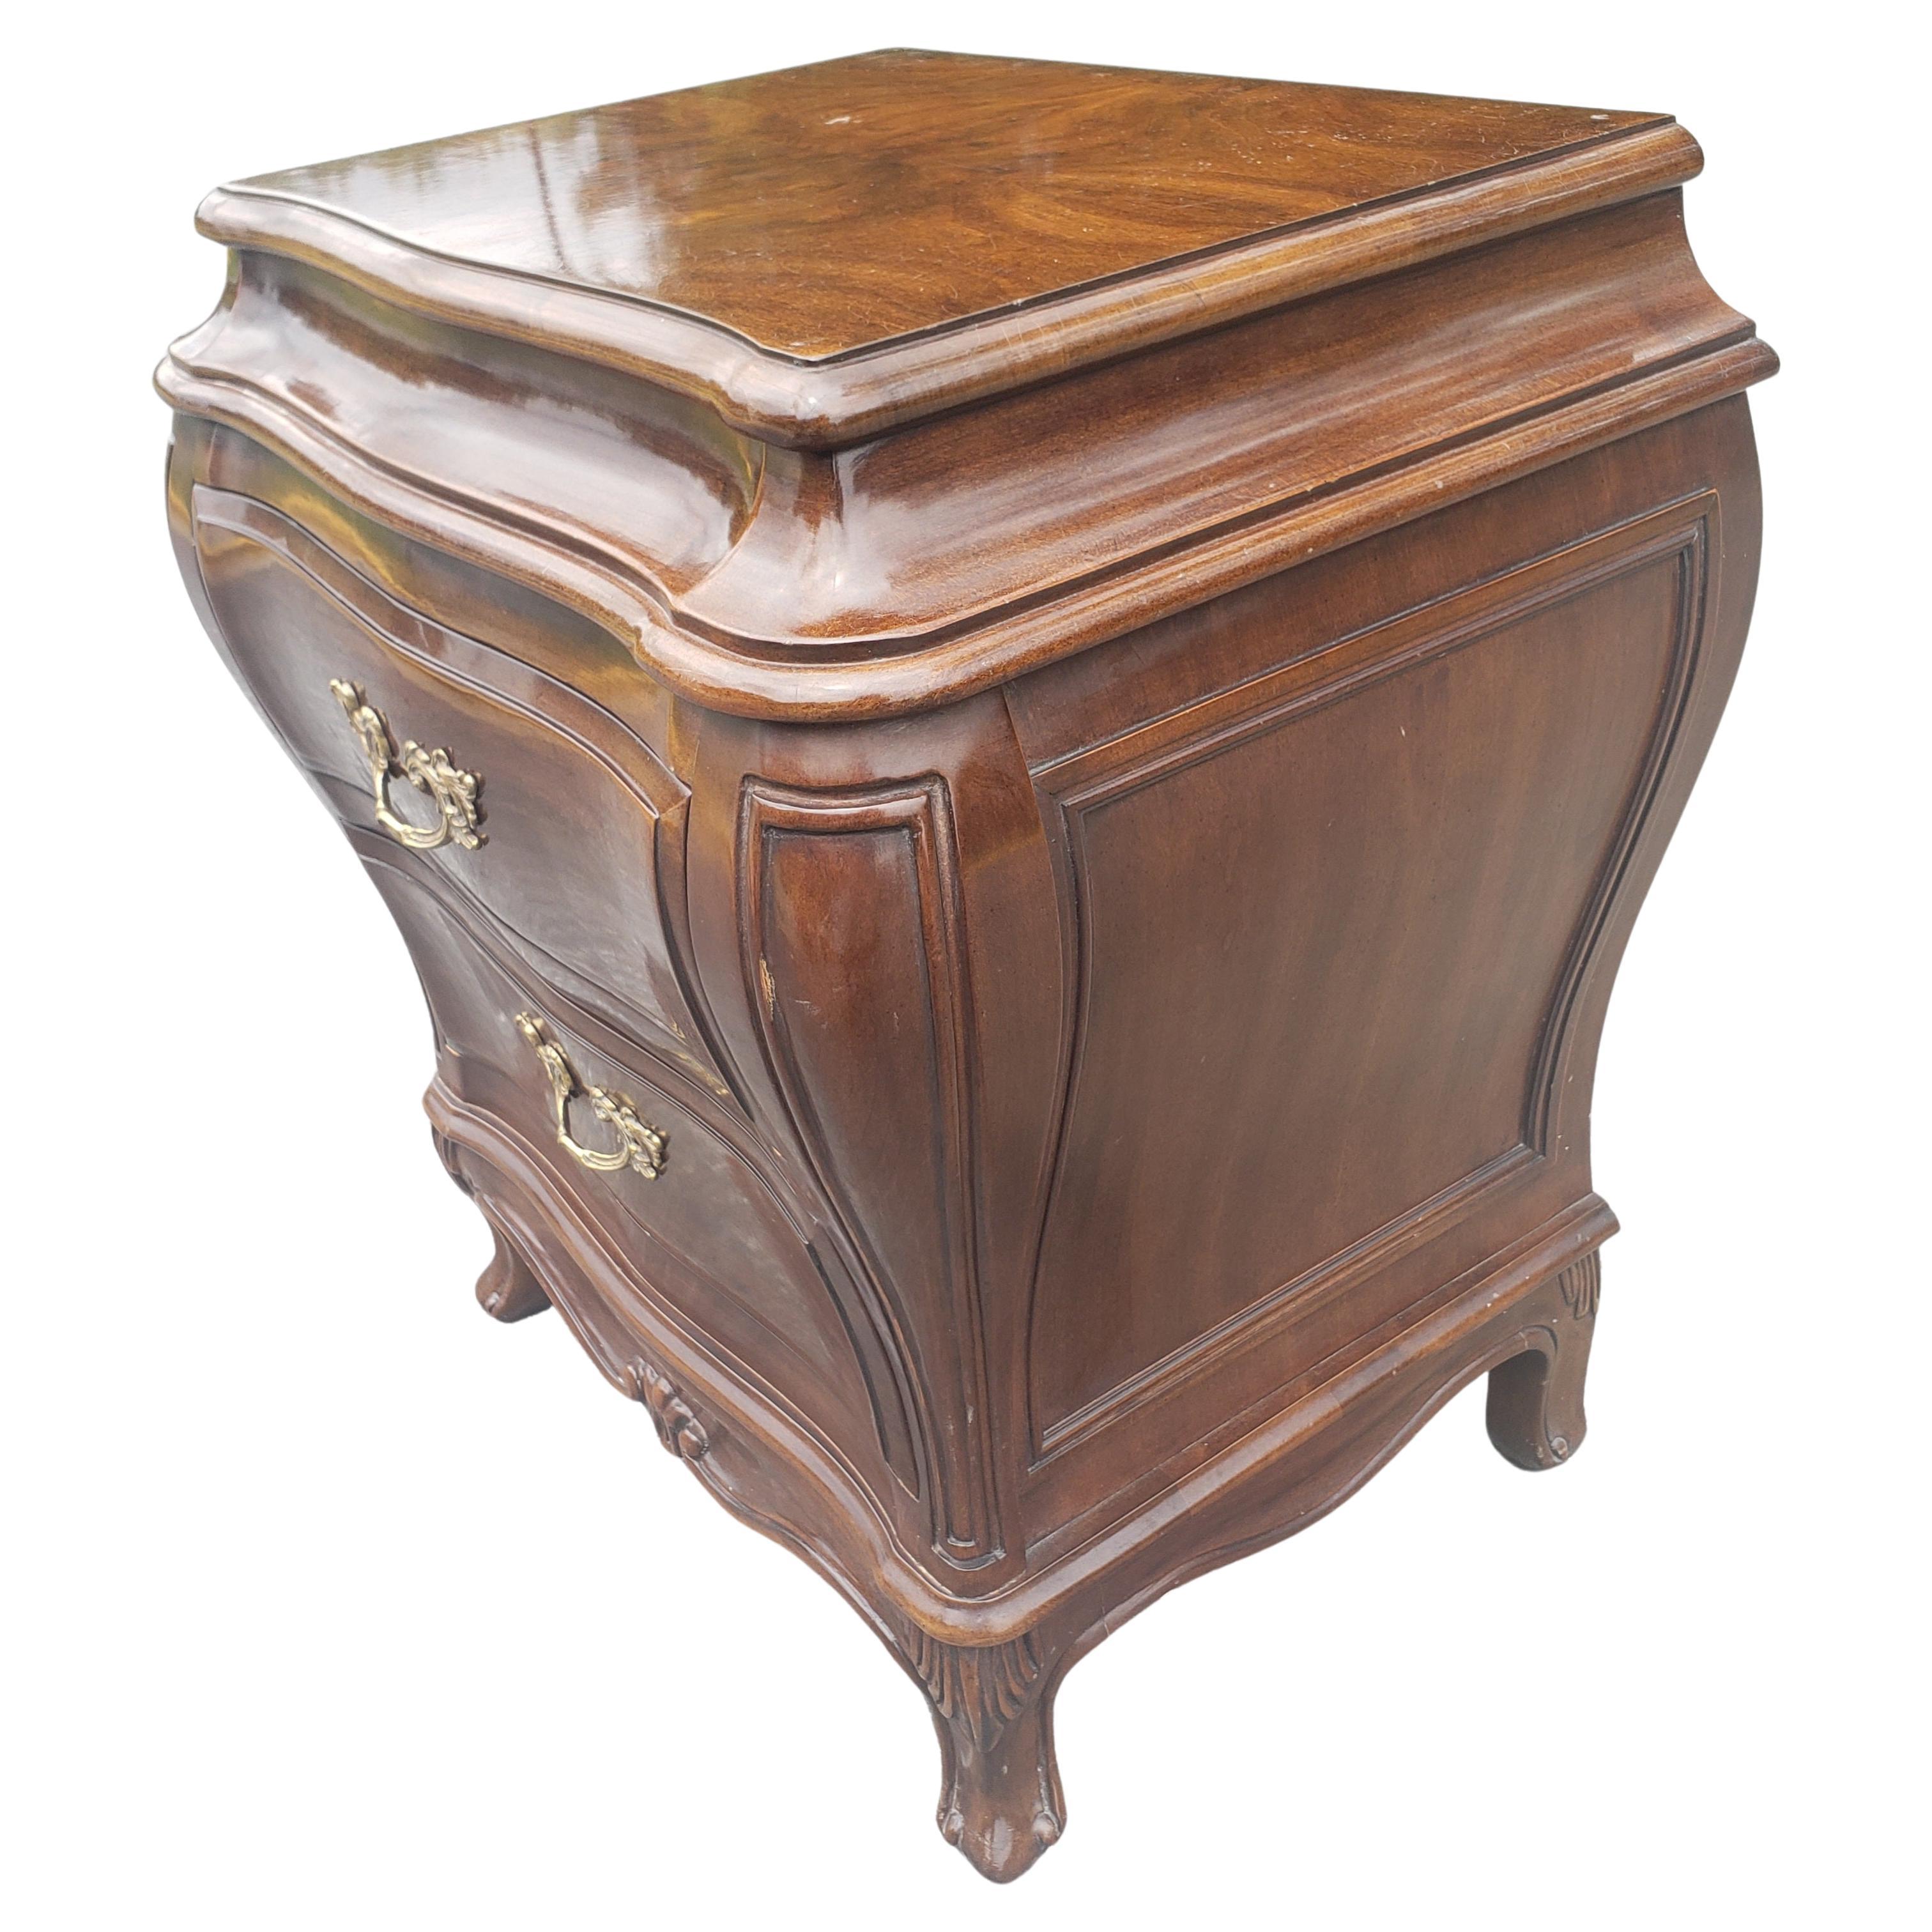 Karges Furniture Louis XVI Mahogany Bombe Nightstands Commodes, a Pair In Good Condition For Sale In Germantown, MD